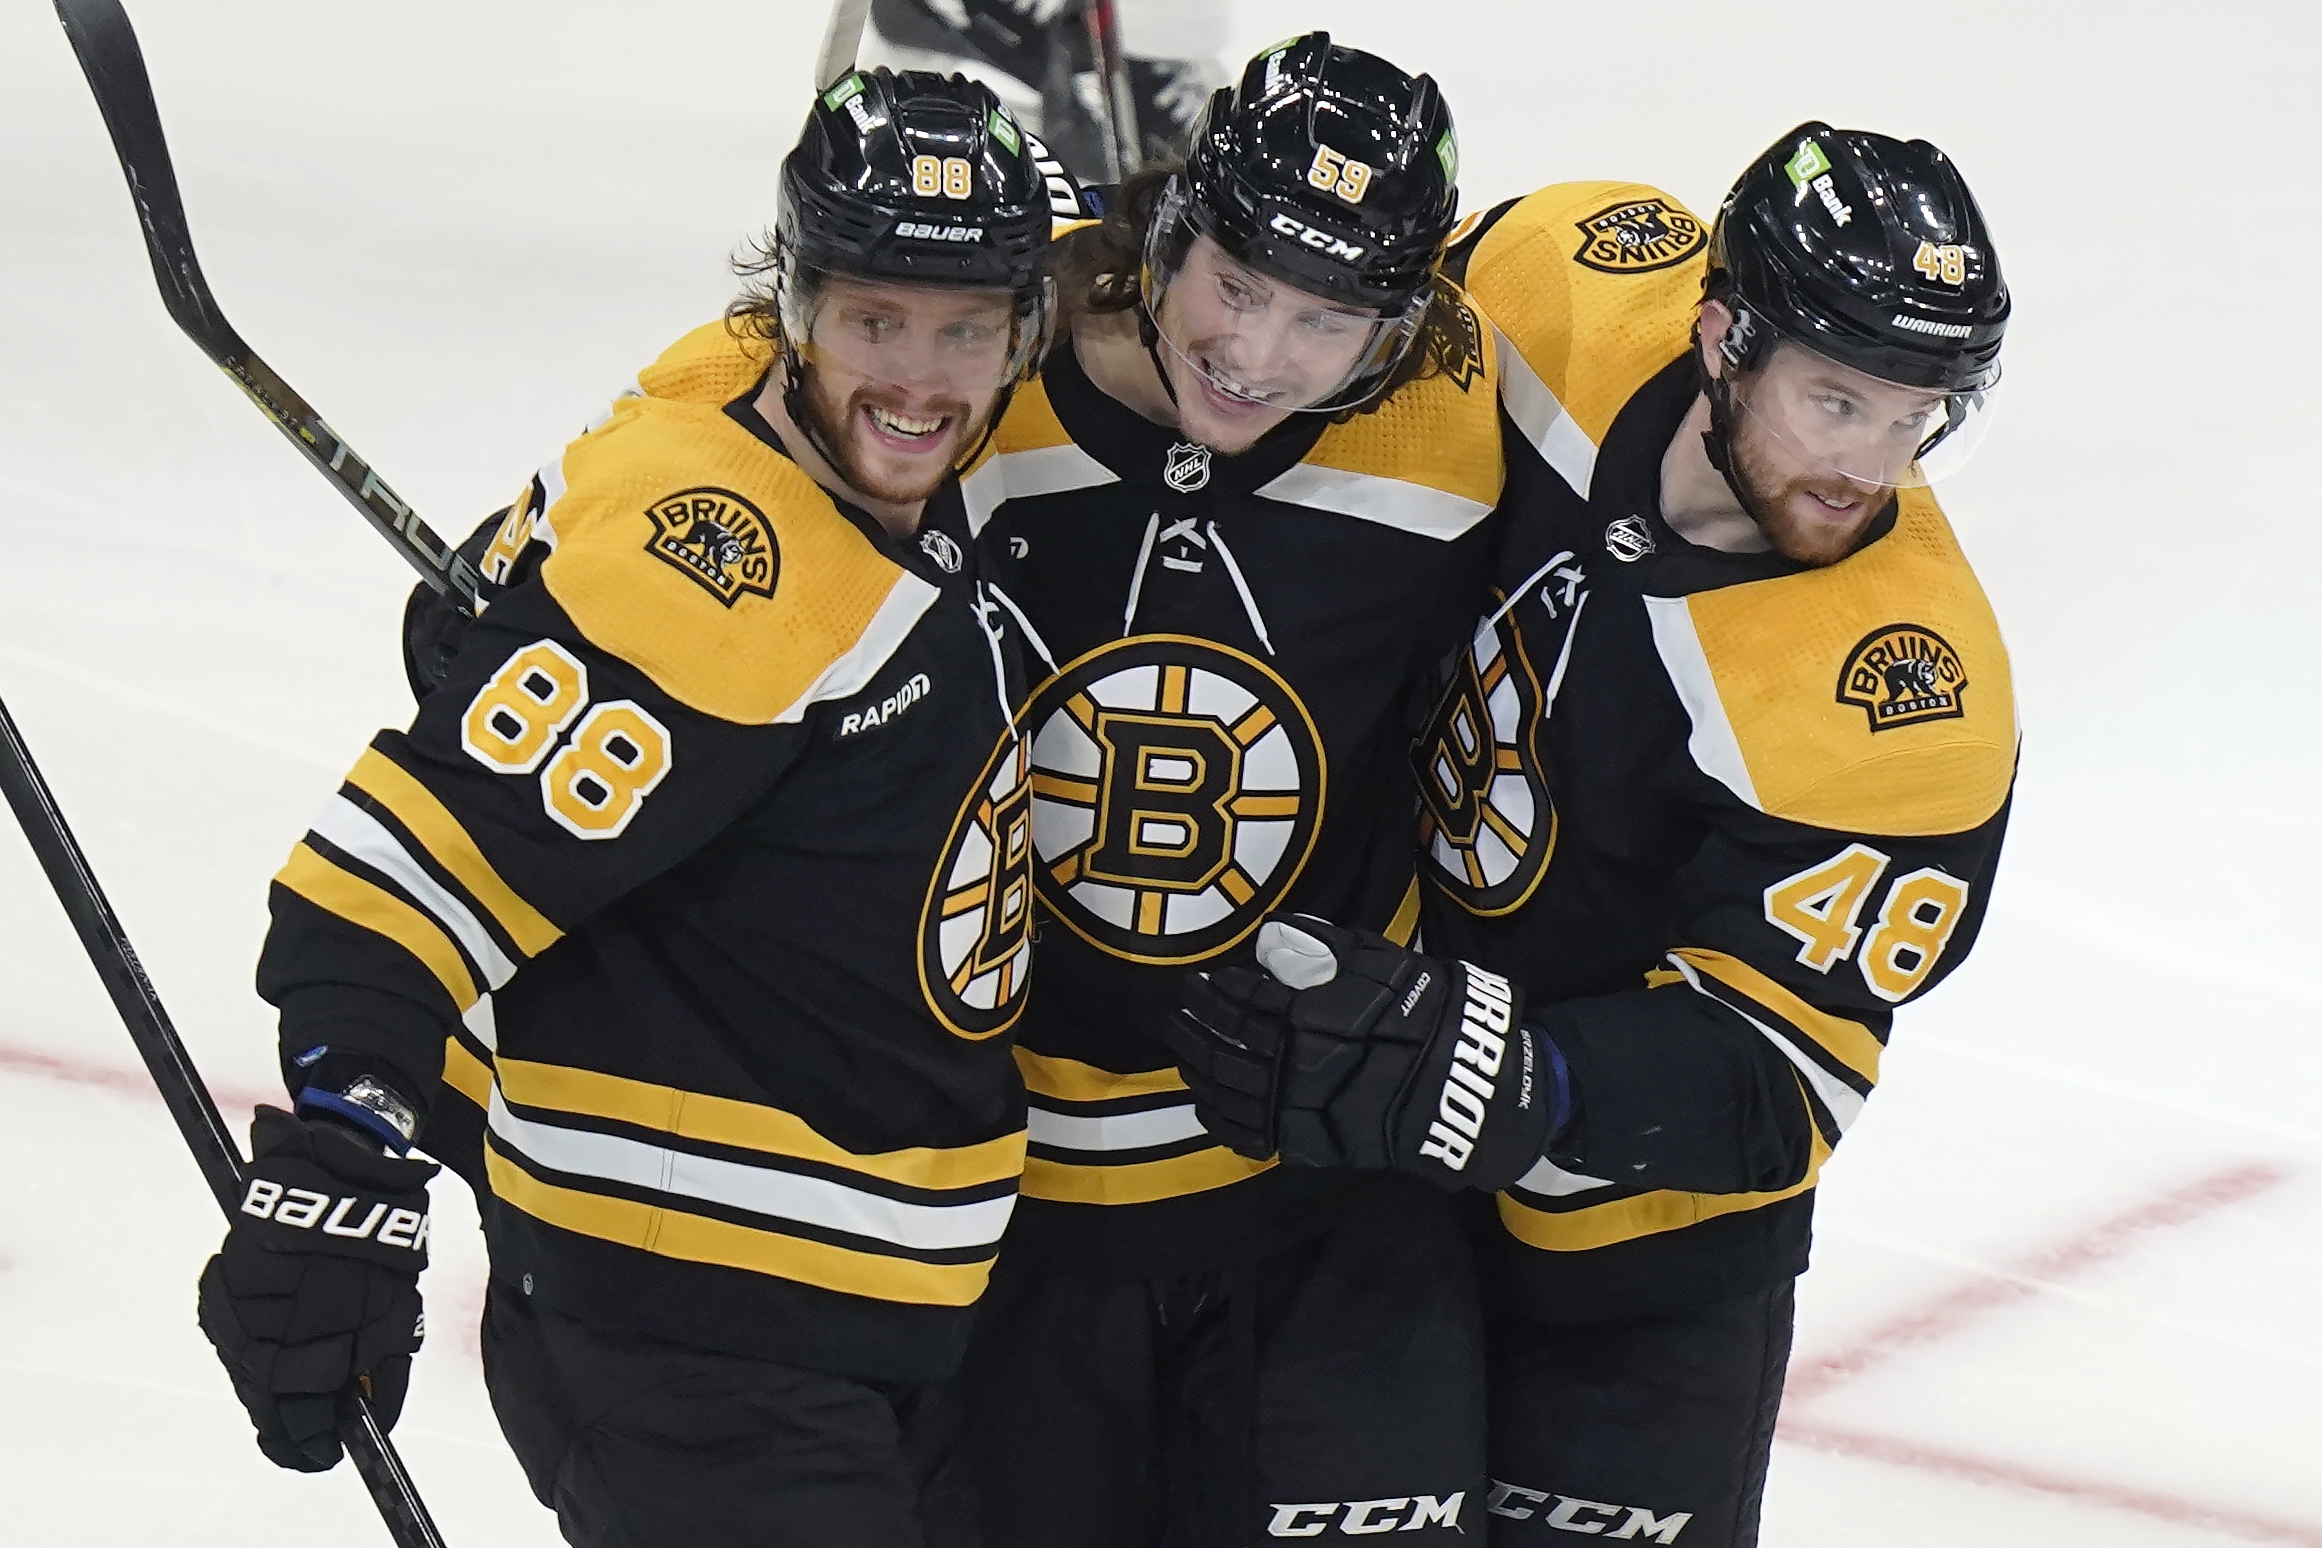 How The Bruins Left The Rest Of The N.H.L. Behind. Far Behind